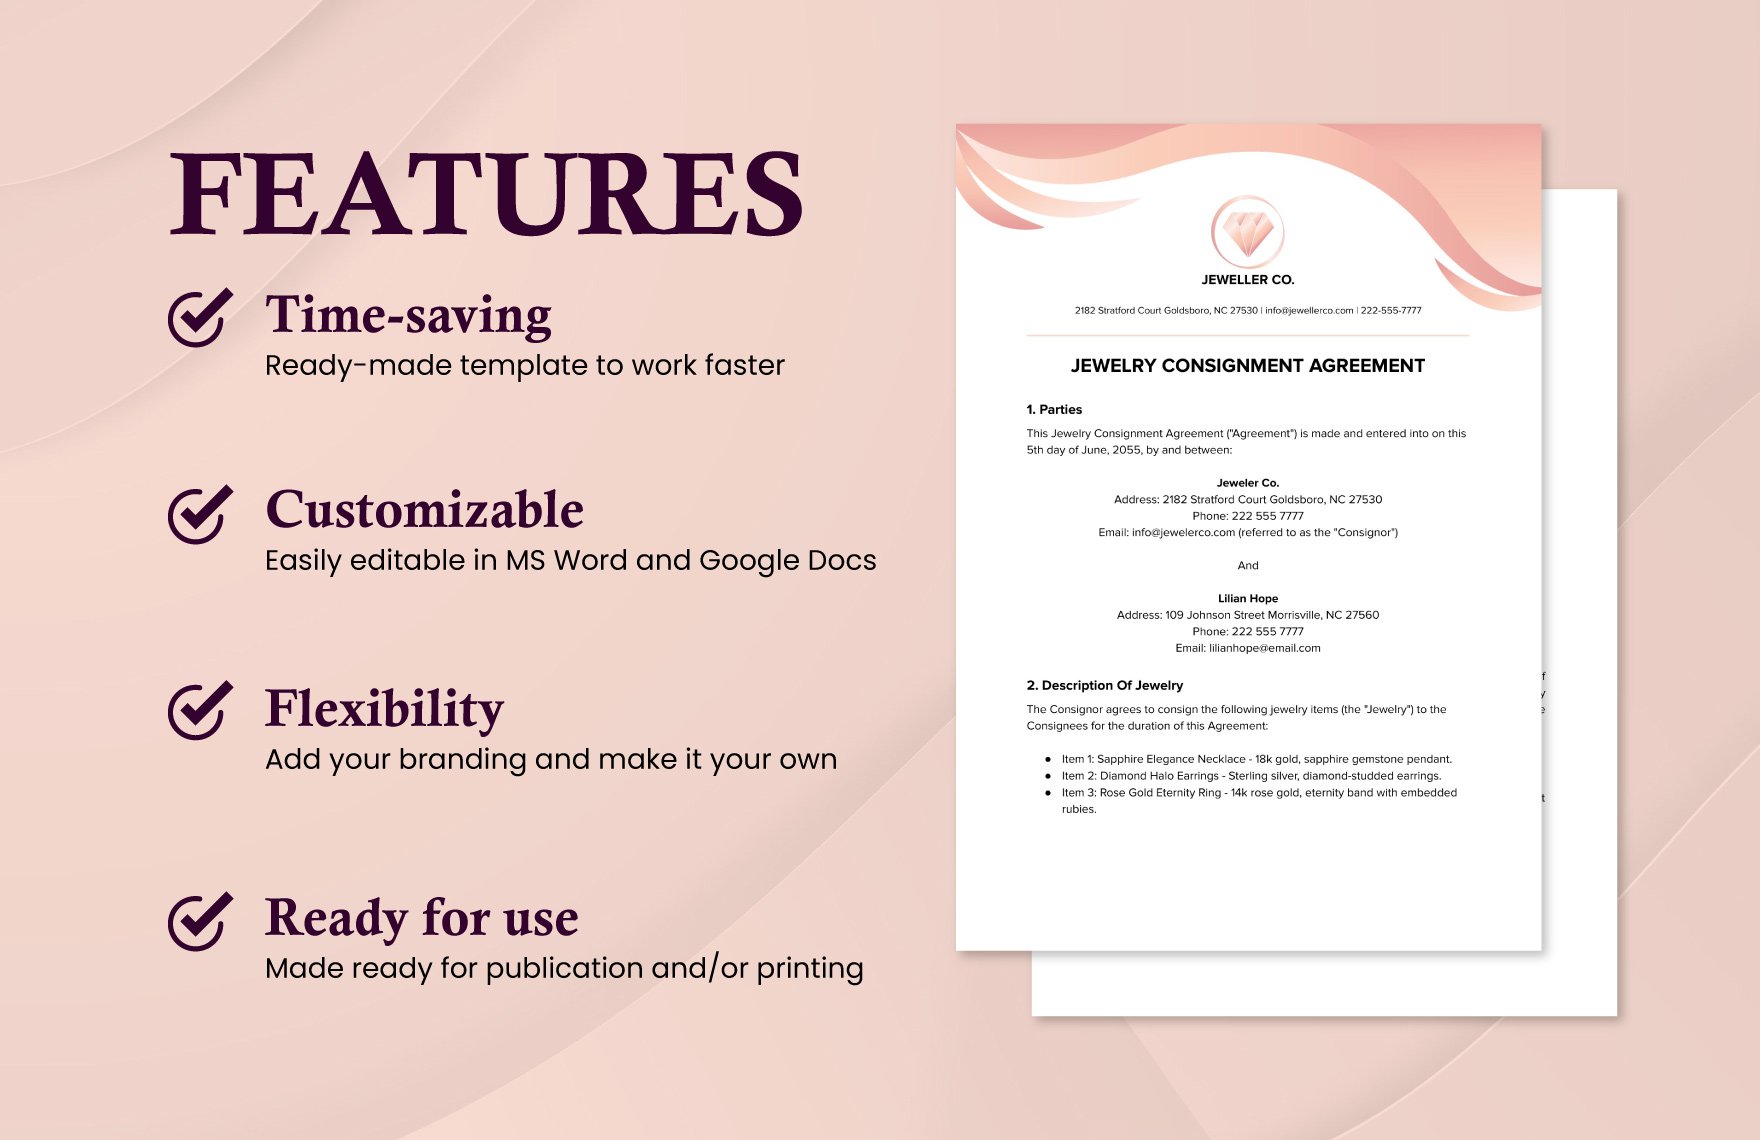 Jewelry Consignment Agreement Template